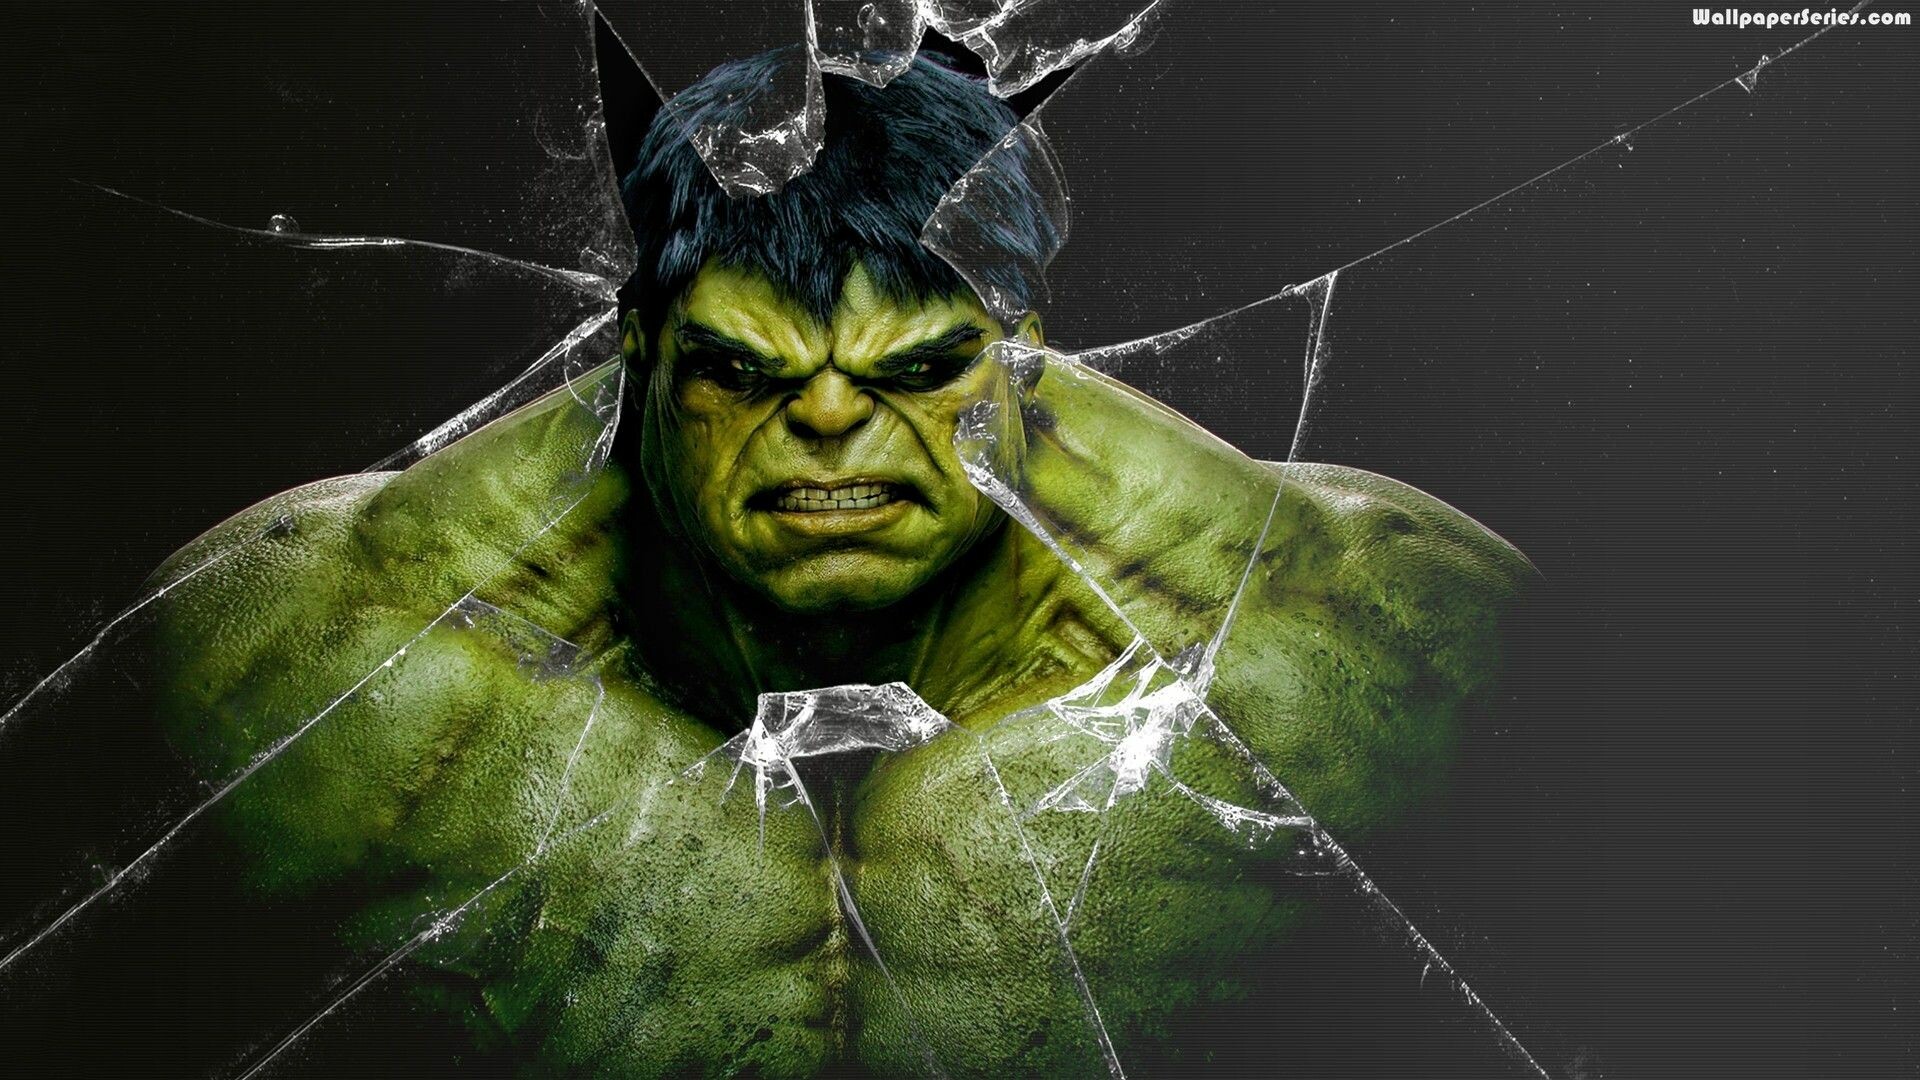 Hulk Wallpapers and Backgrounds image Free Download